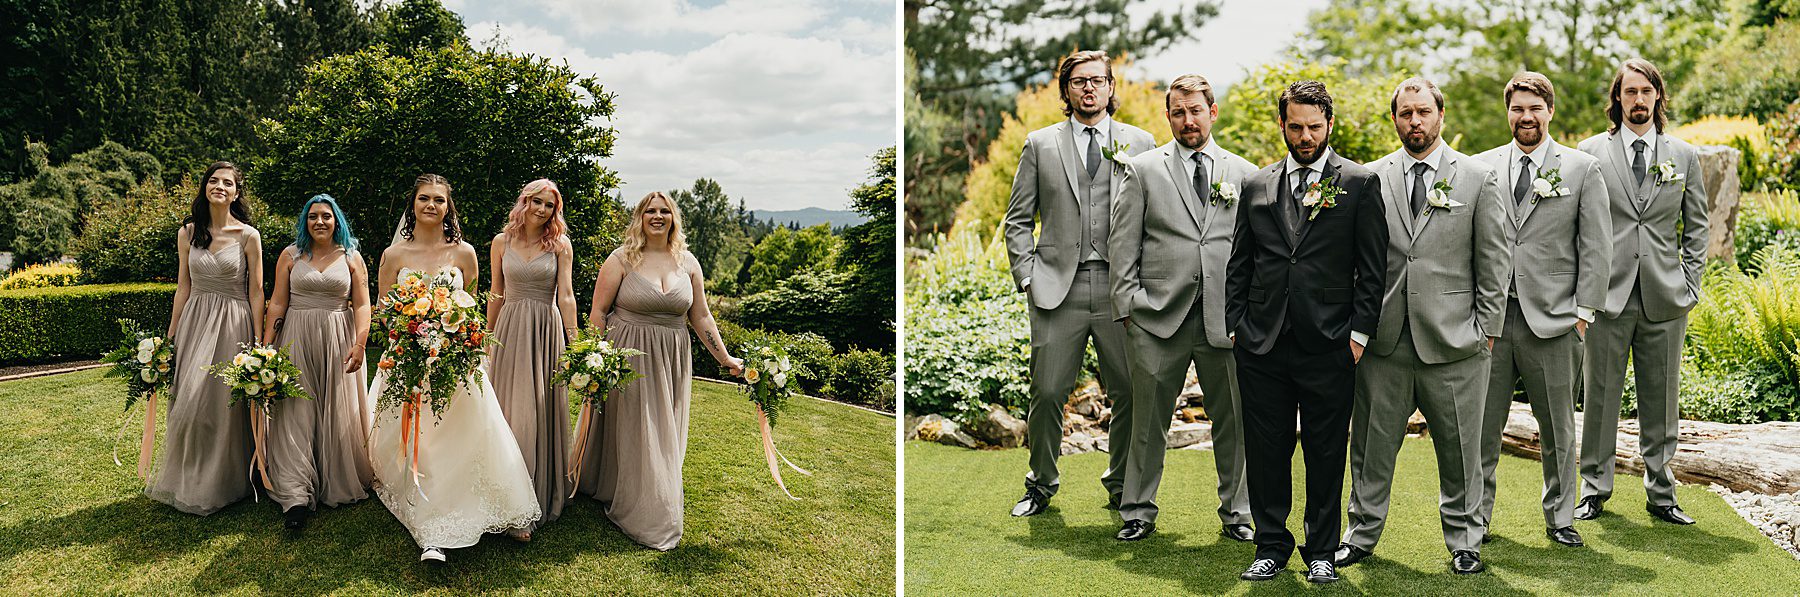 bridesmaids with a bride and groomsmen with a groom